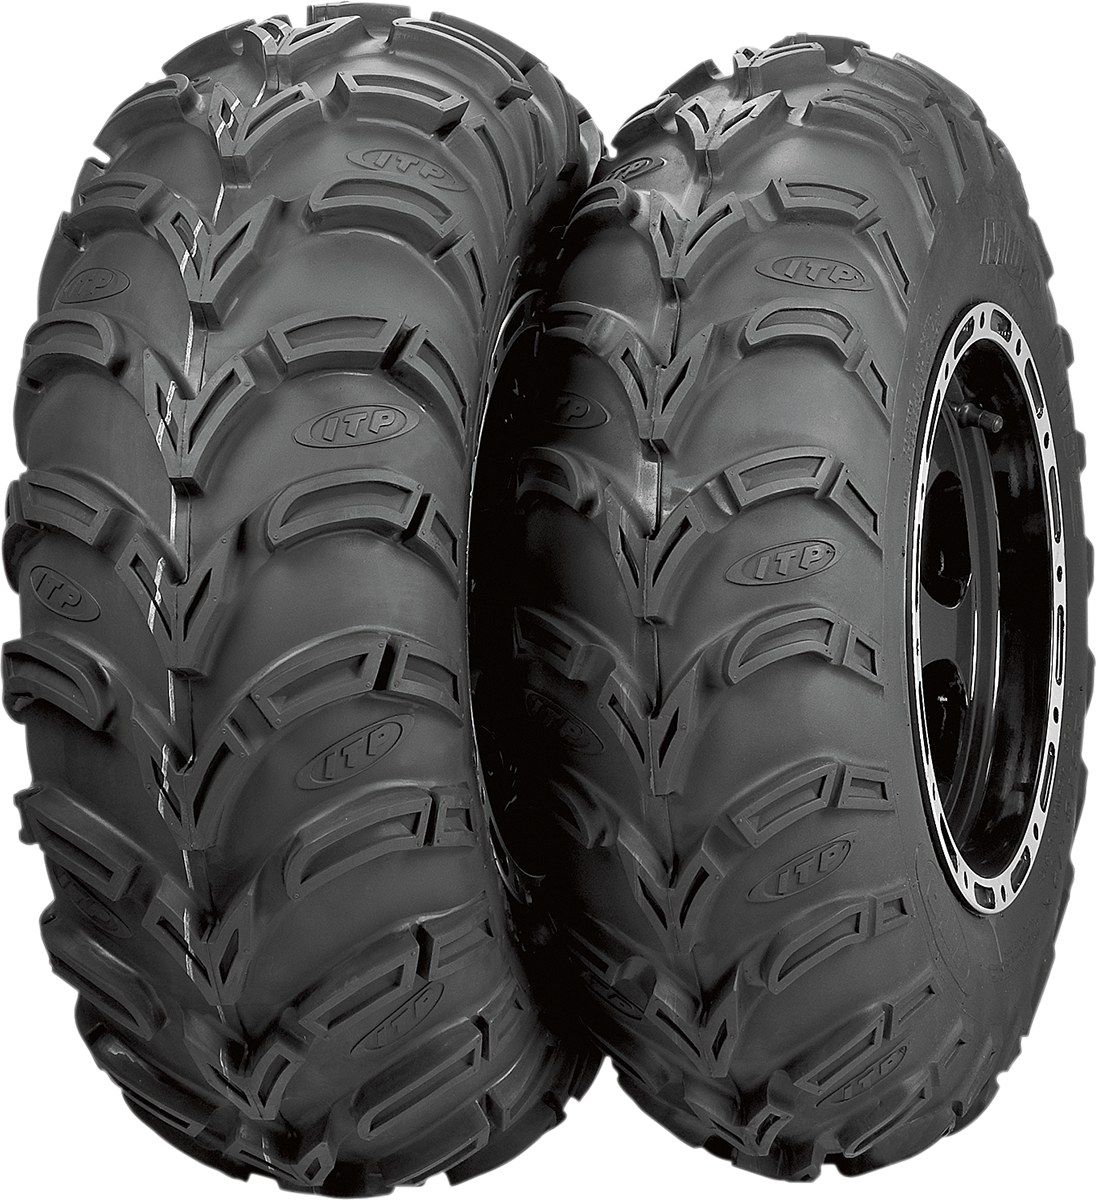 ITP Tire - Mud Lite AT - Front/Rear - 25x8-11 - 6 Ply 56A320